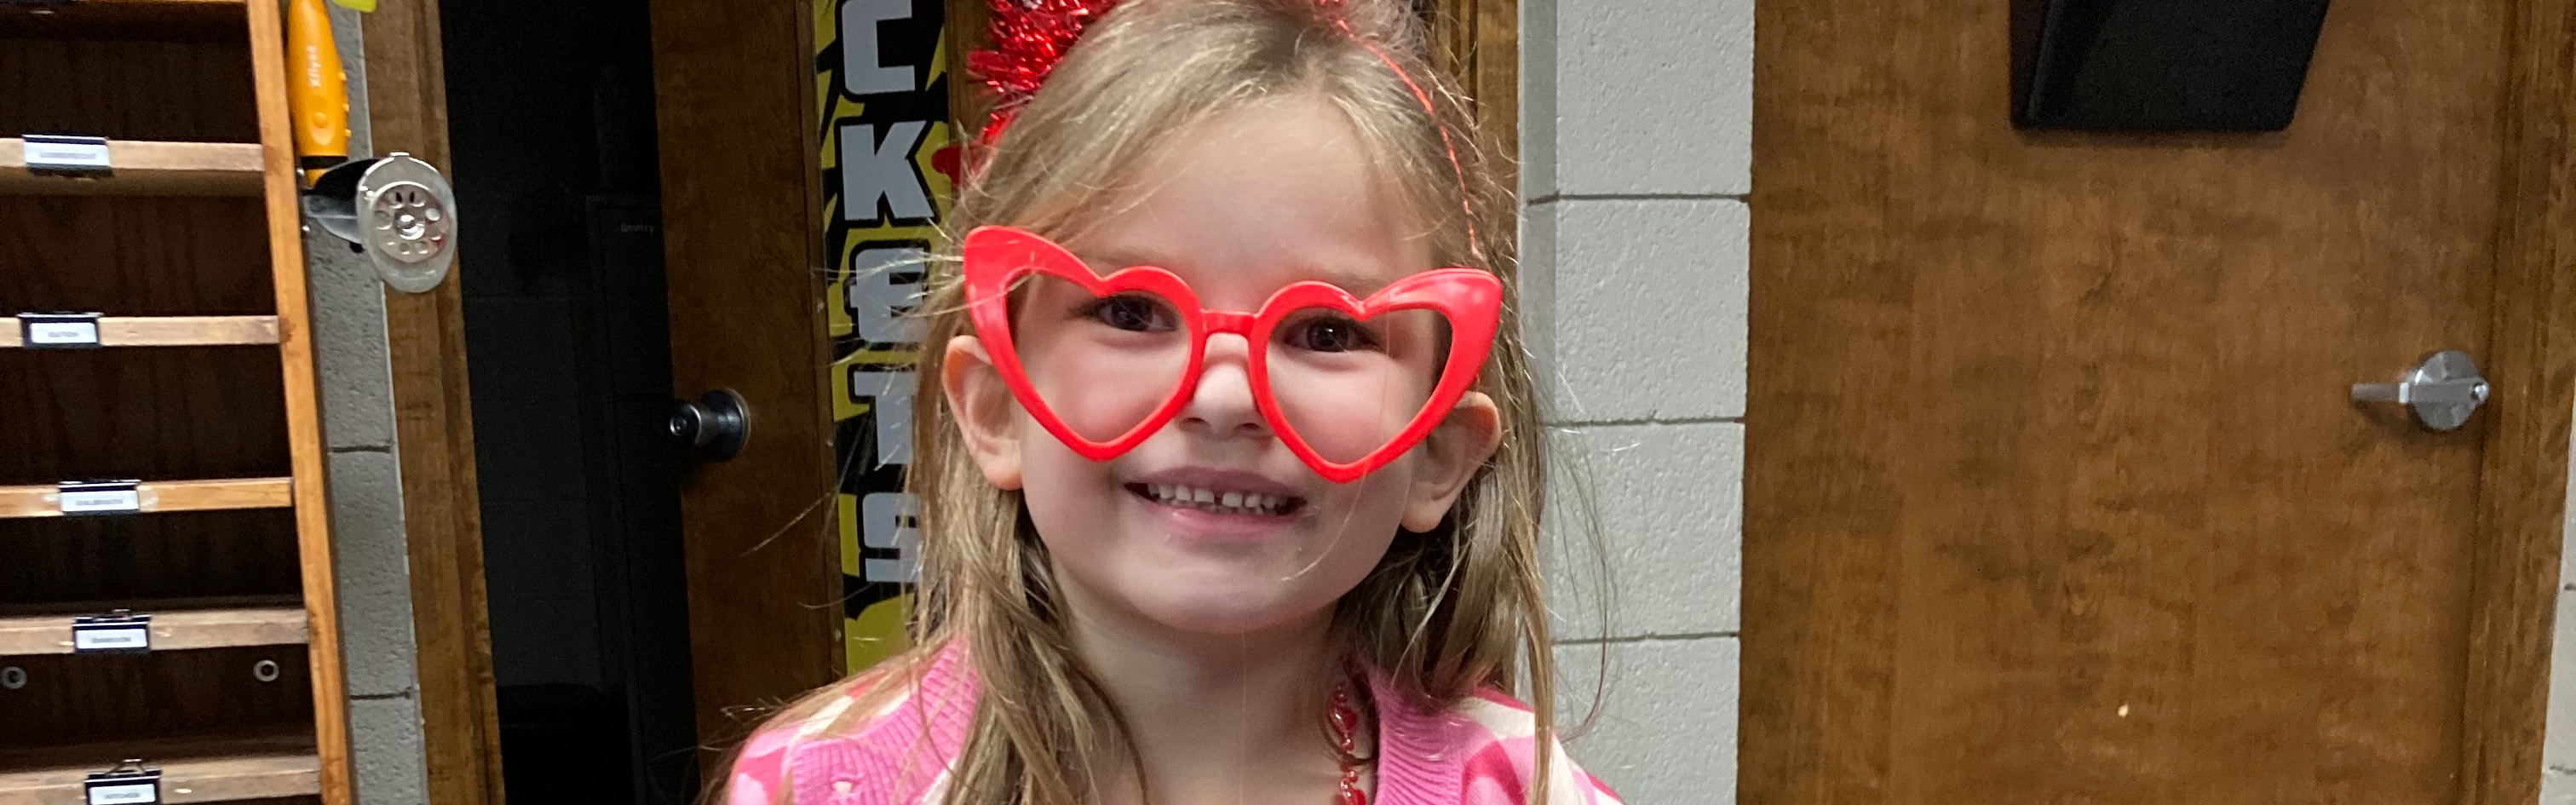 Picture of a female Eddyville student with heart sunglasses on smiling for the camera